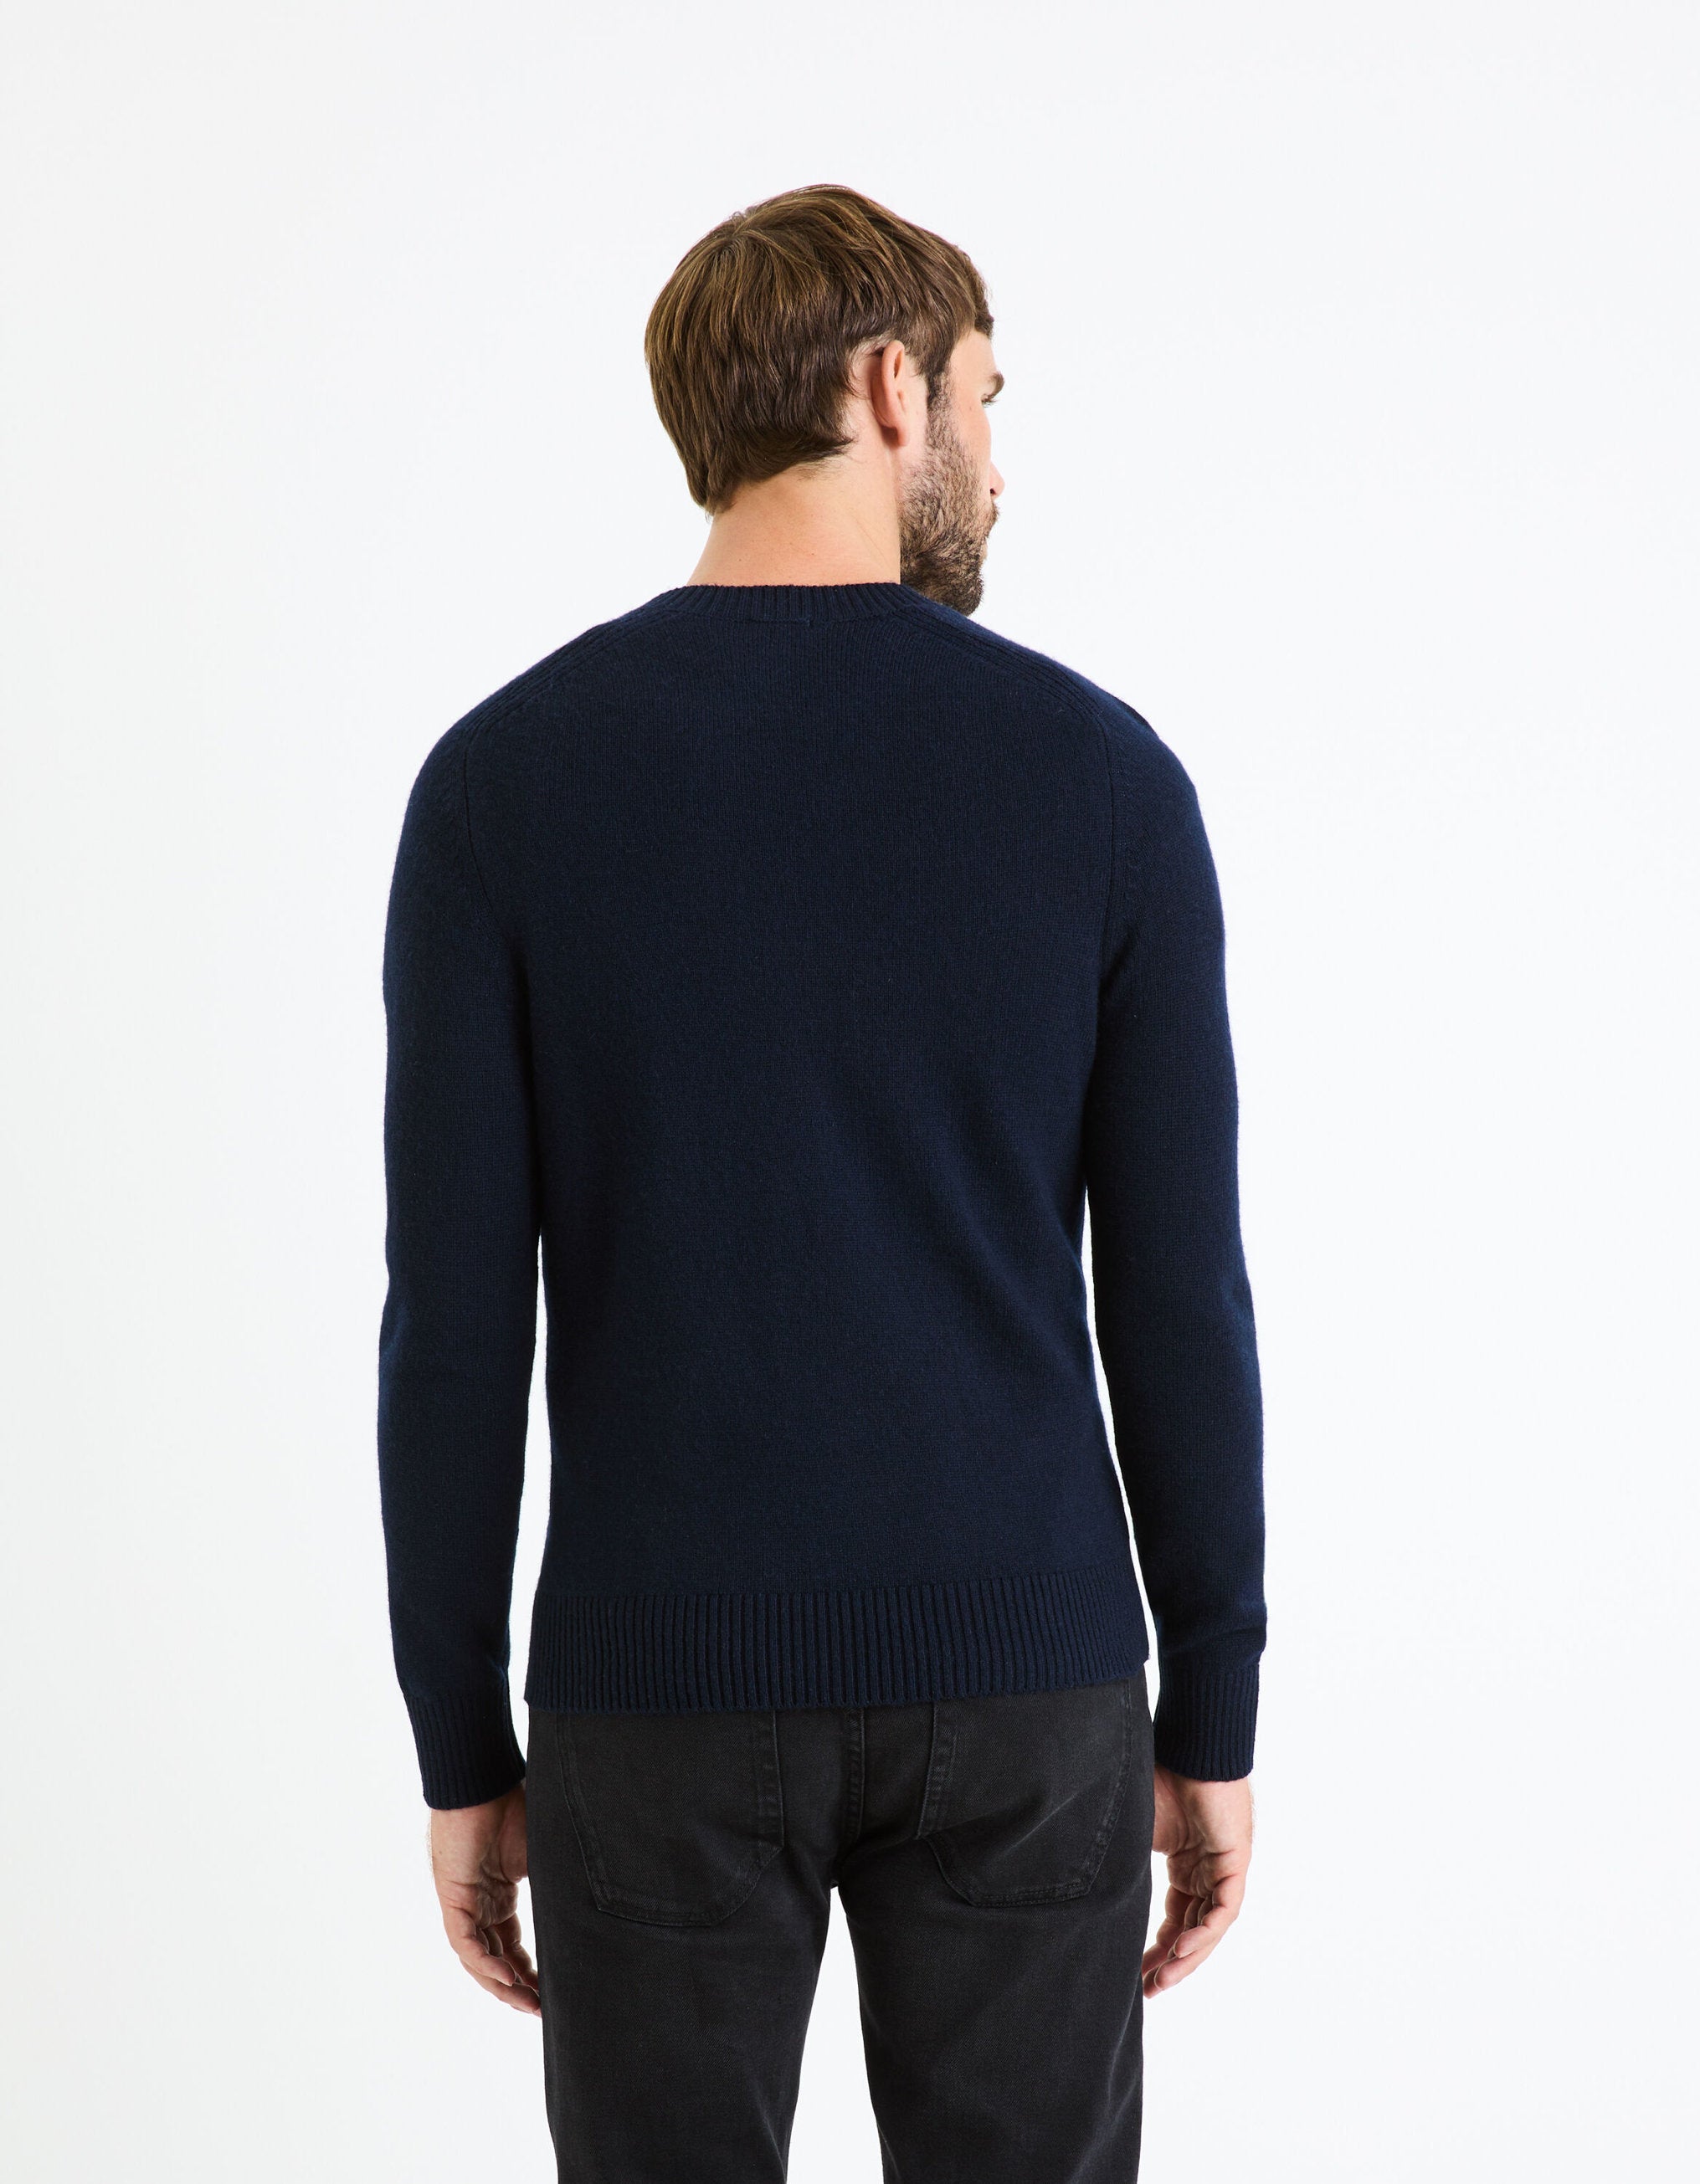 Round Neck Sweater 100% Lambswool - Navy_CEWOOL_ENCRE FONCE_04